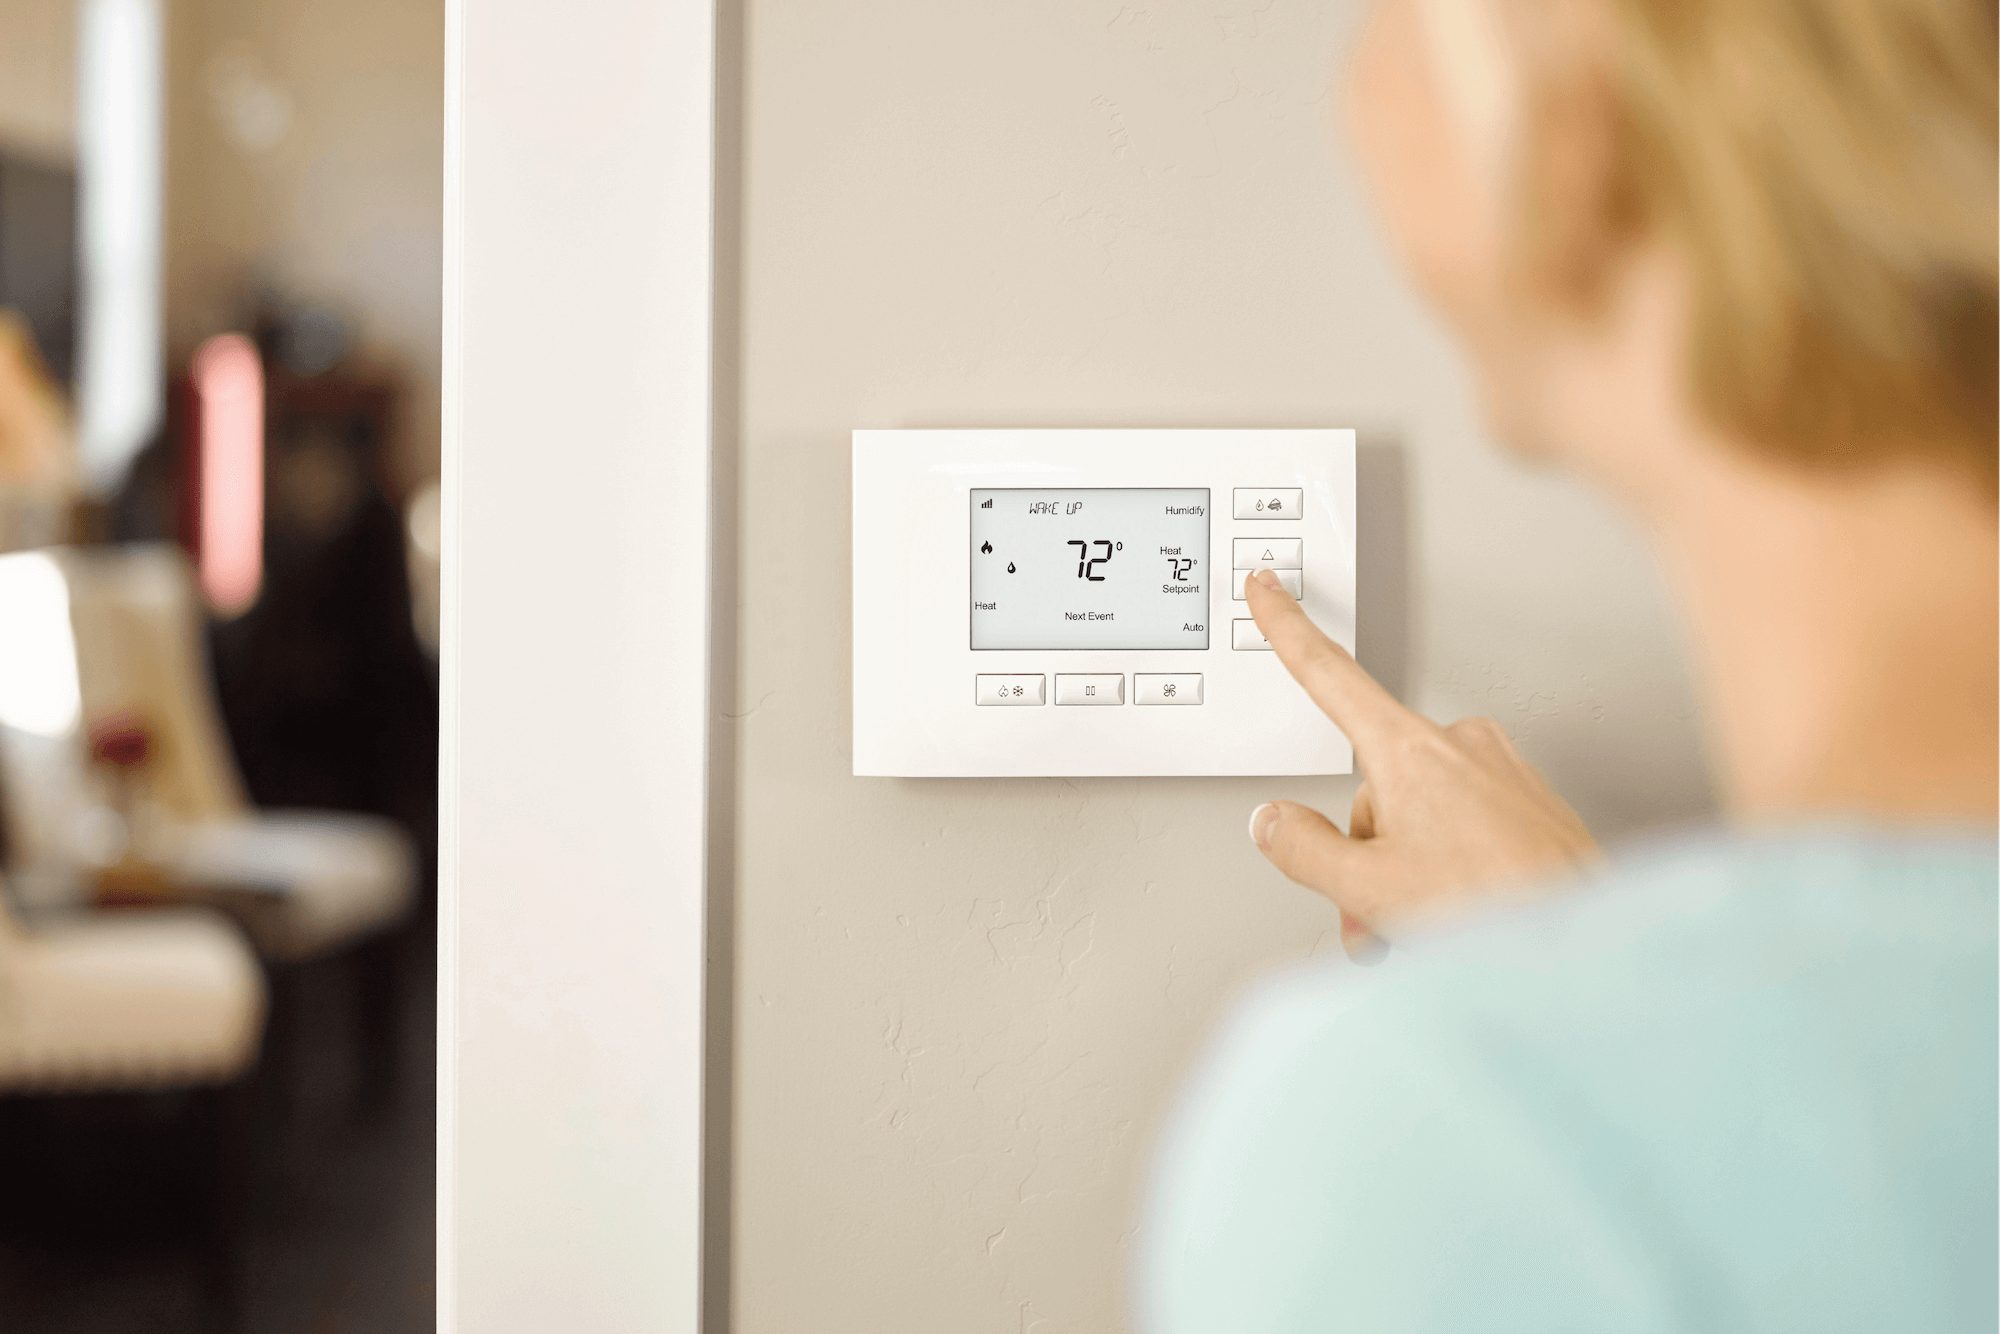 Easy to use smart thermostat